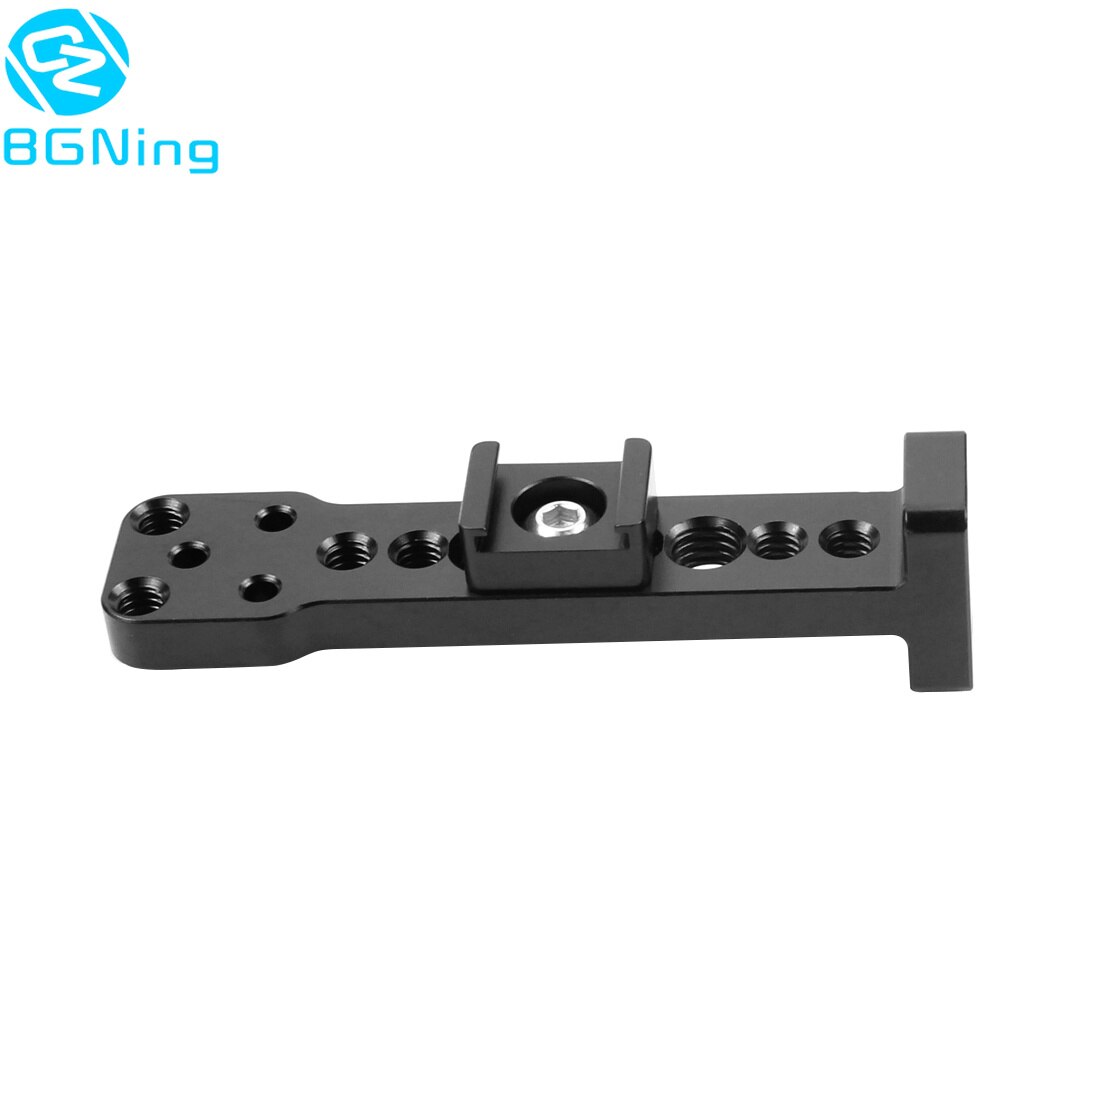 BGNing Aluminium External Extension Mounting Plate Bracket Quick Release for Mic Monitor Arm Adapter for DJI Ronin S Handheld Gimbal